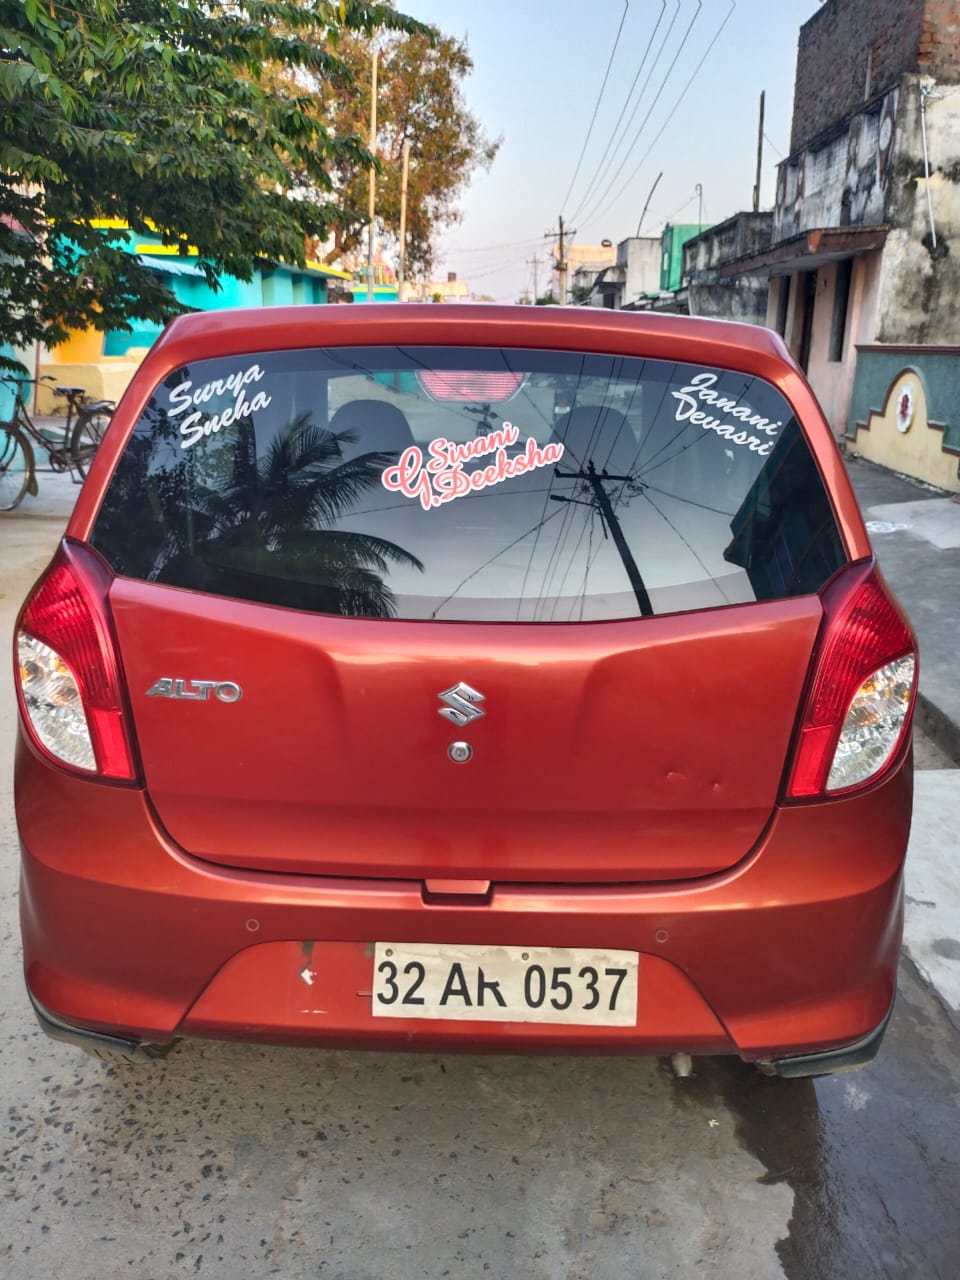 6598-for-sale-Maruthi-Suzuki-Alto-800-Petrol-First-Owner-2019-TN-registered-rs-320000